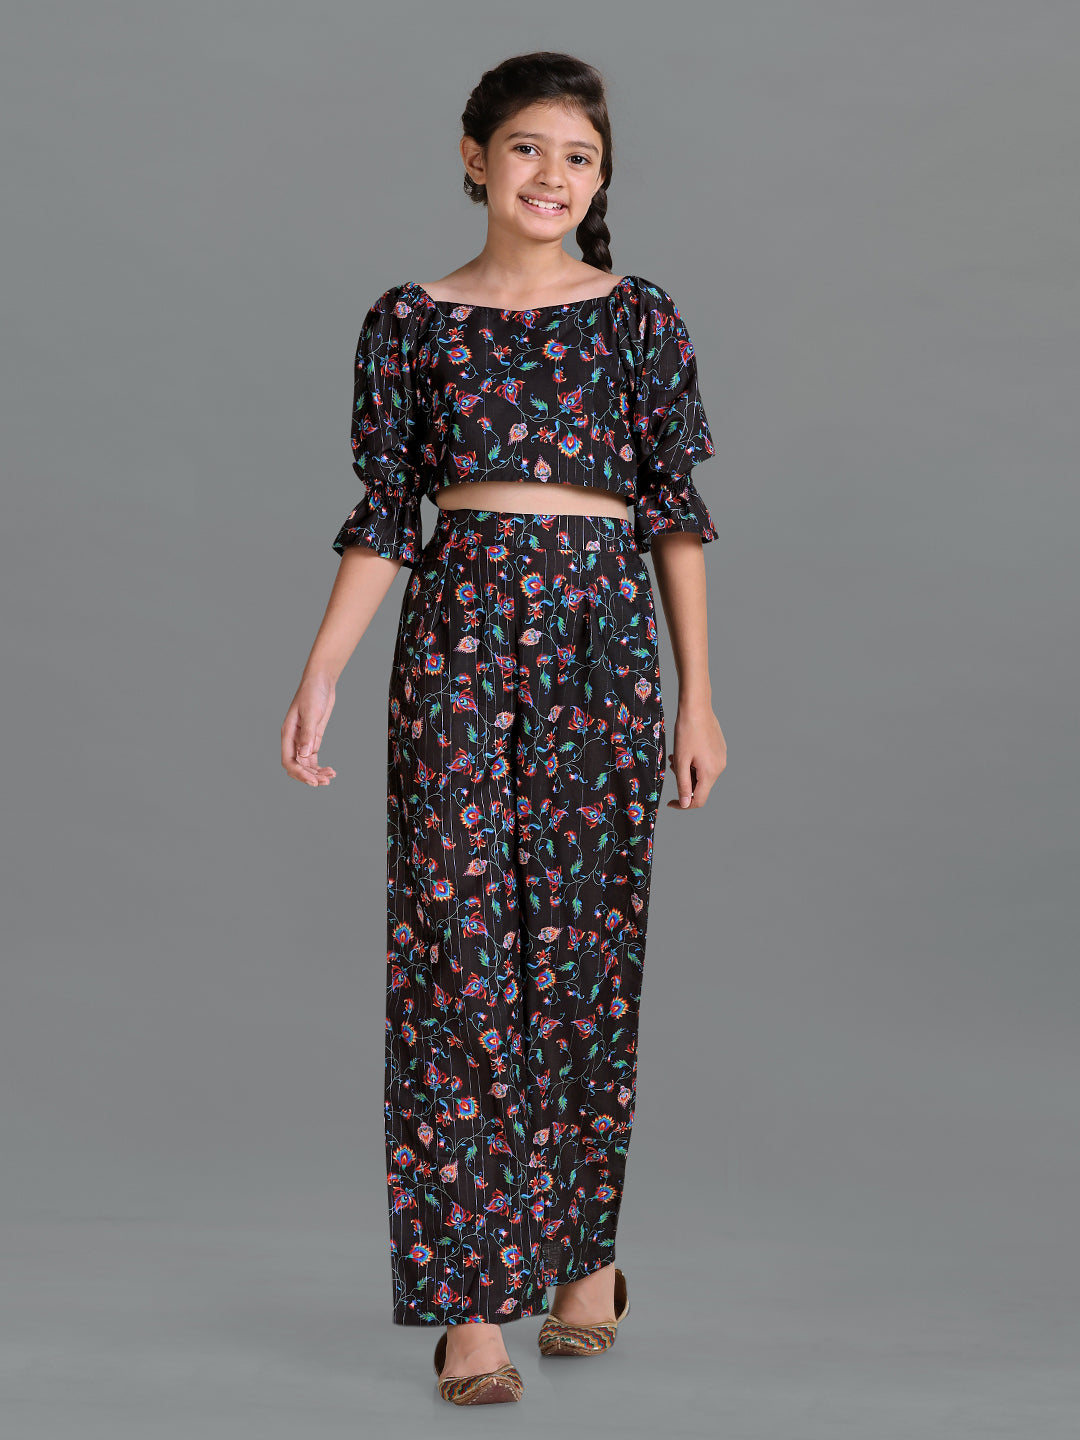 Starlet exclusive embellished corset top and pants set in vibrant floral |  ASOS